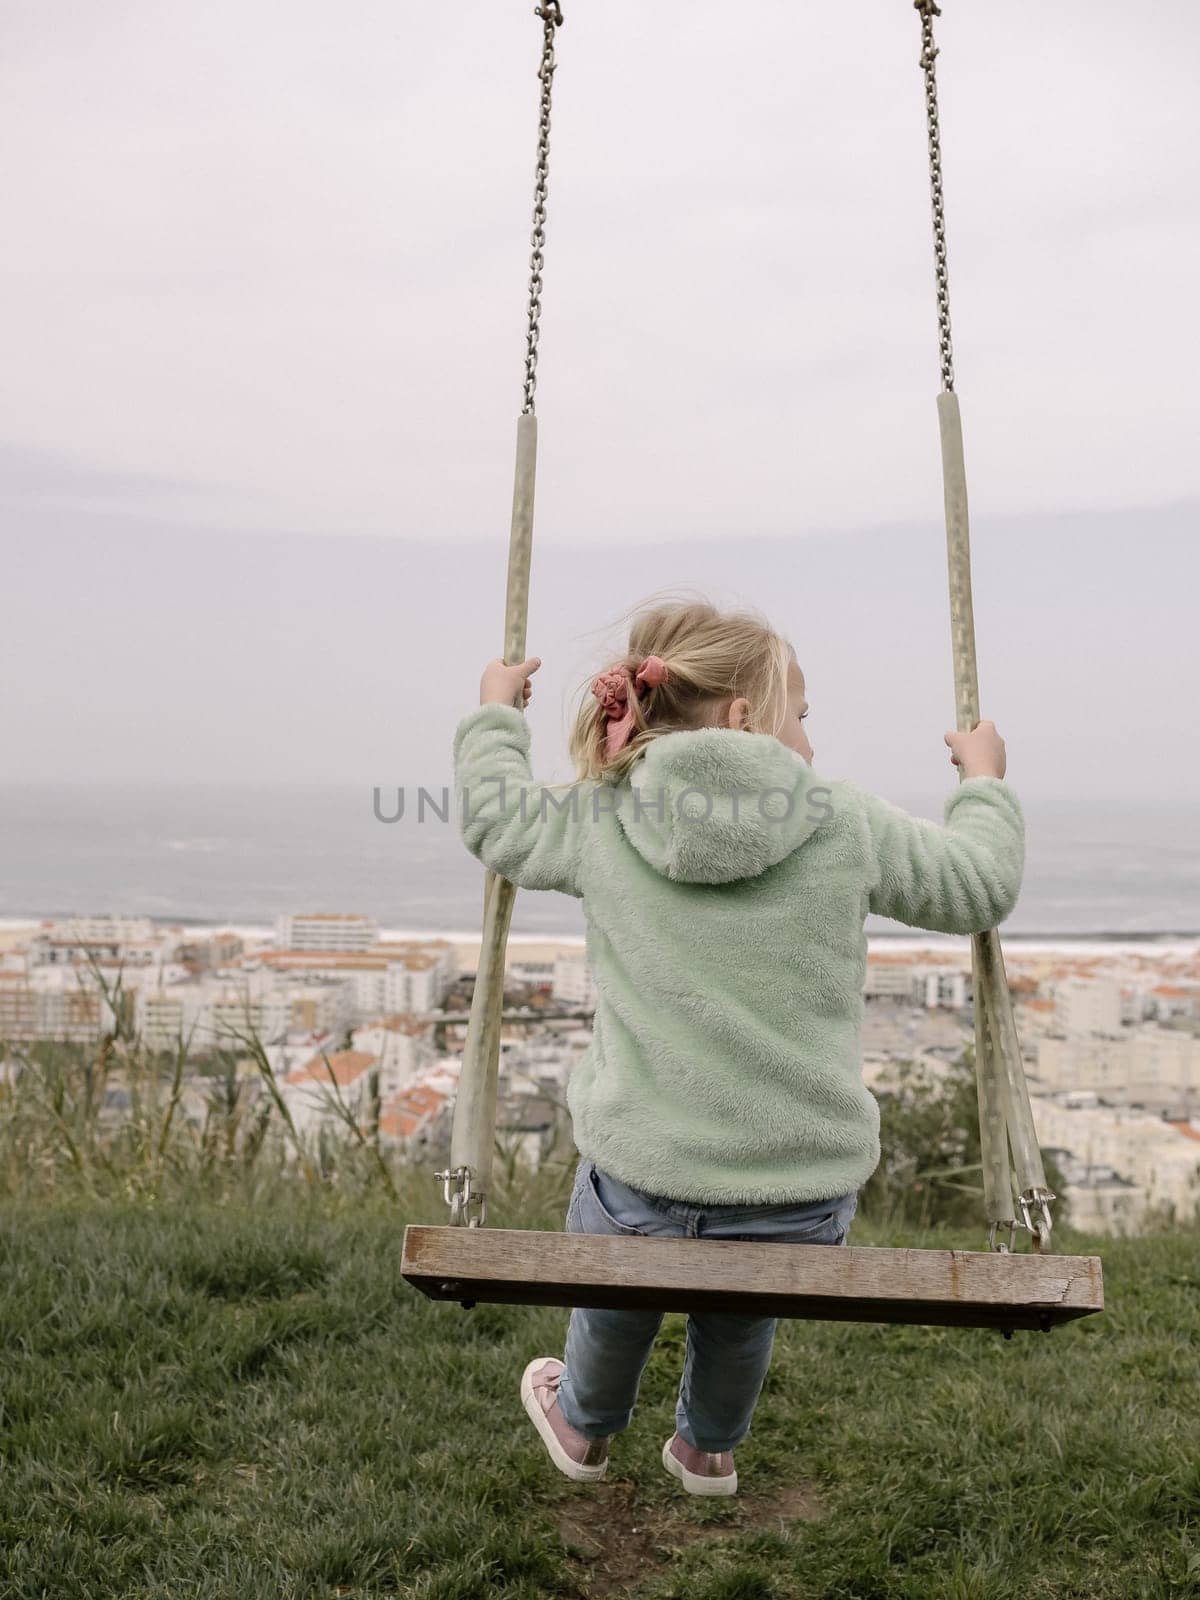 Swinging on Wooden Swing with Ocean and City View by gcm